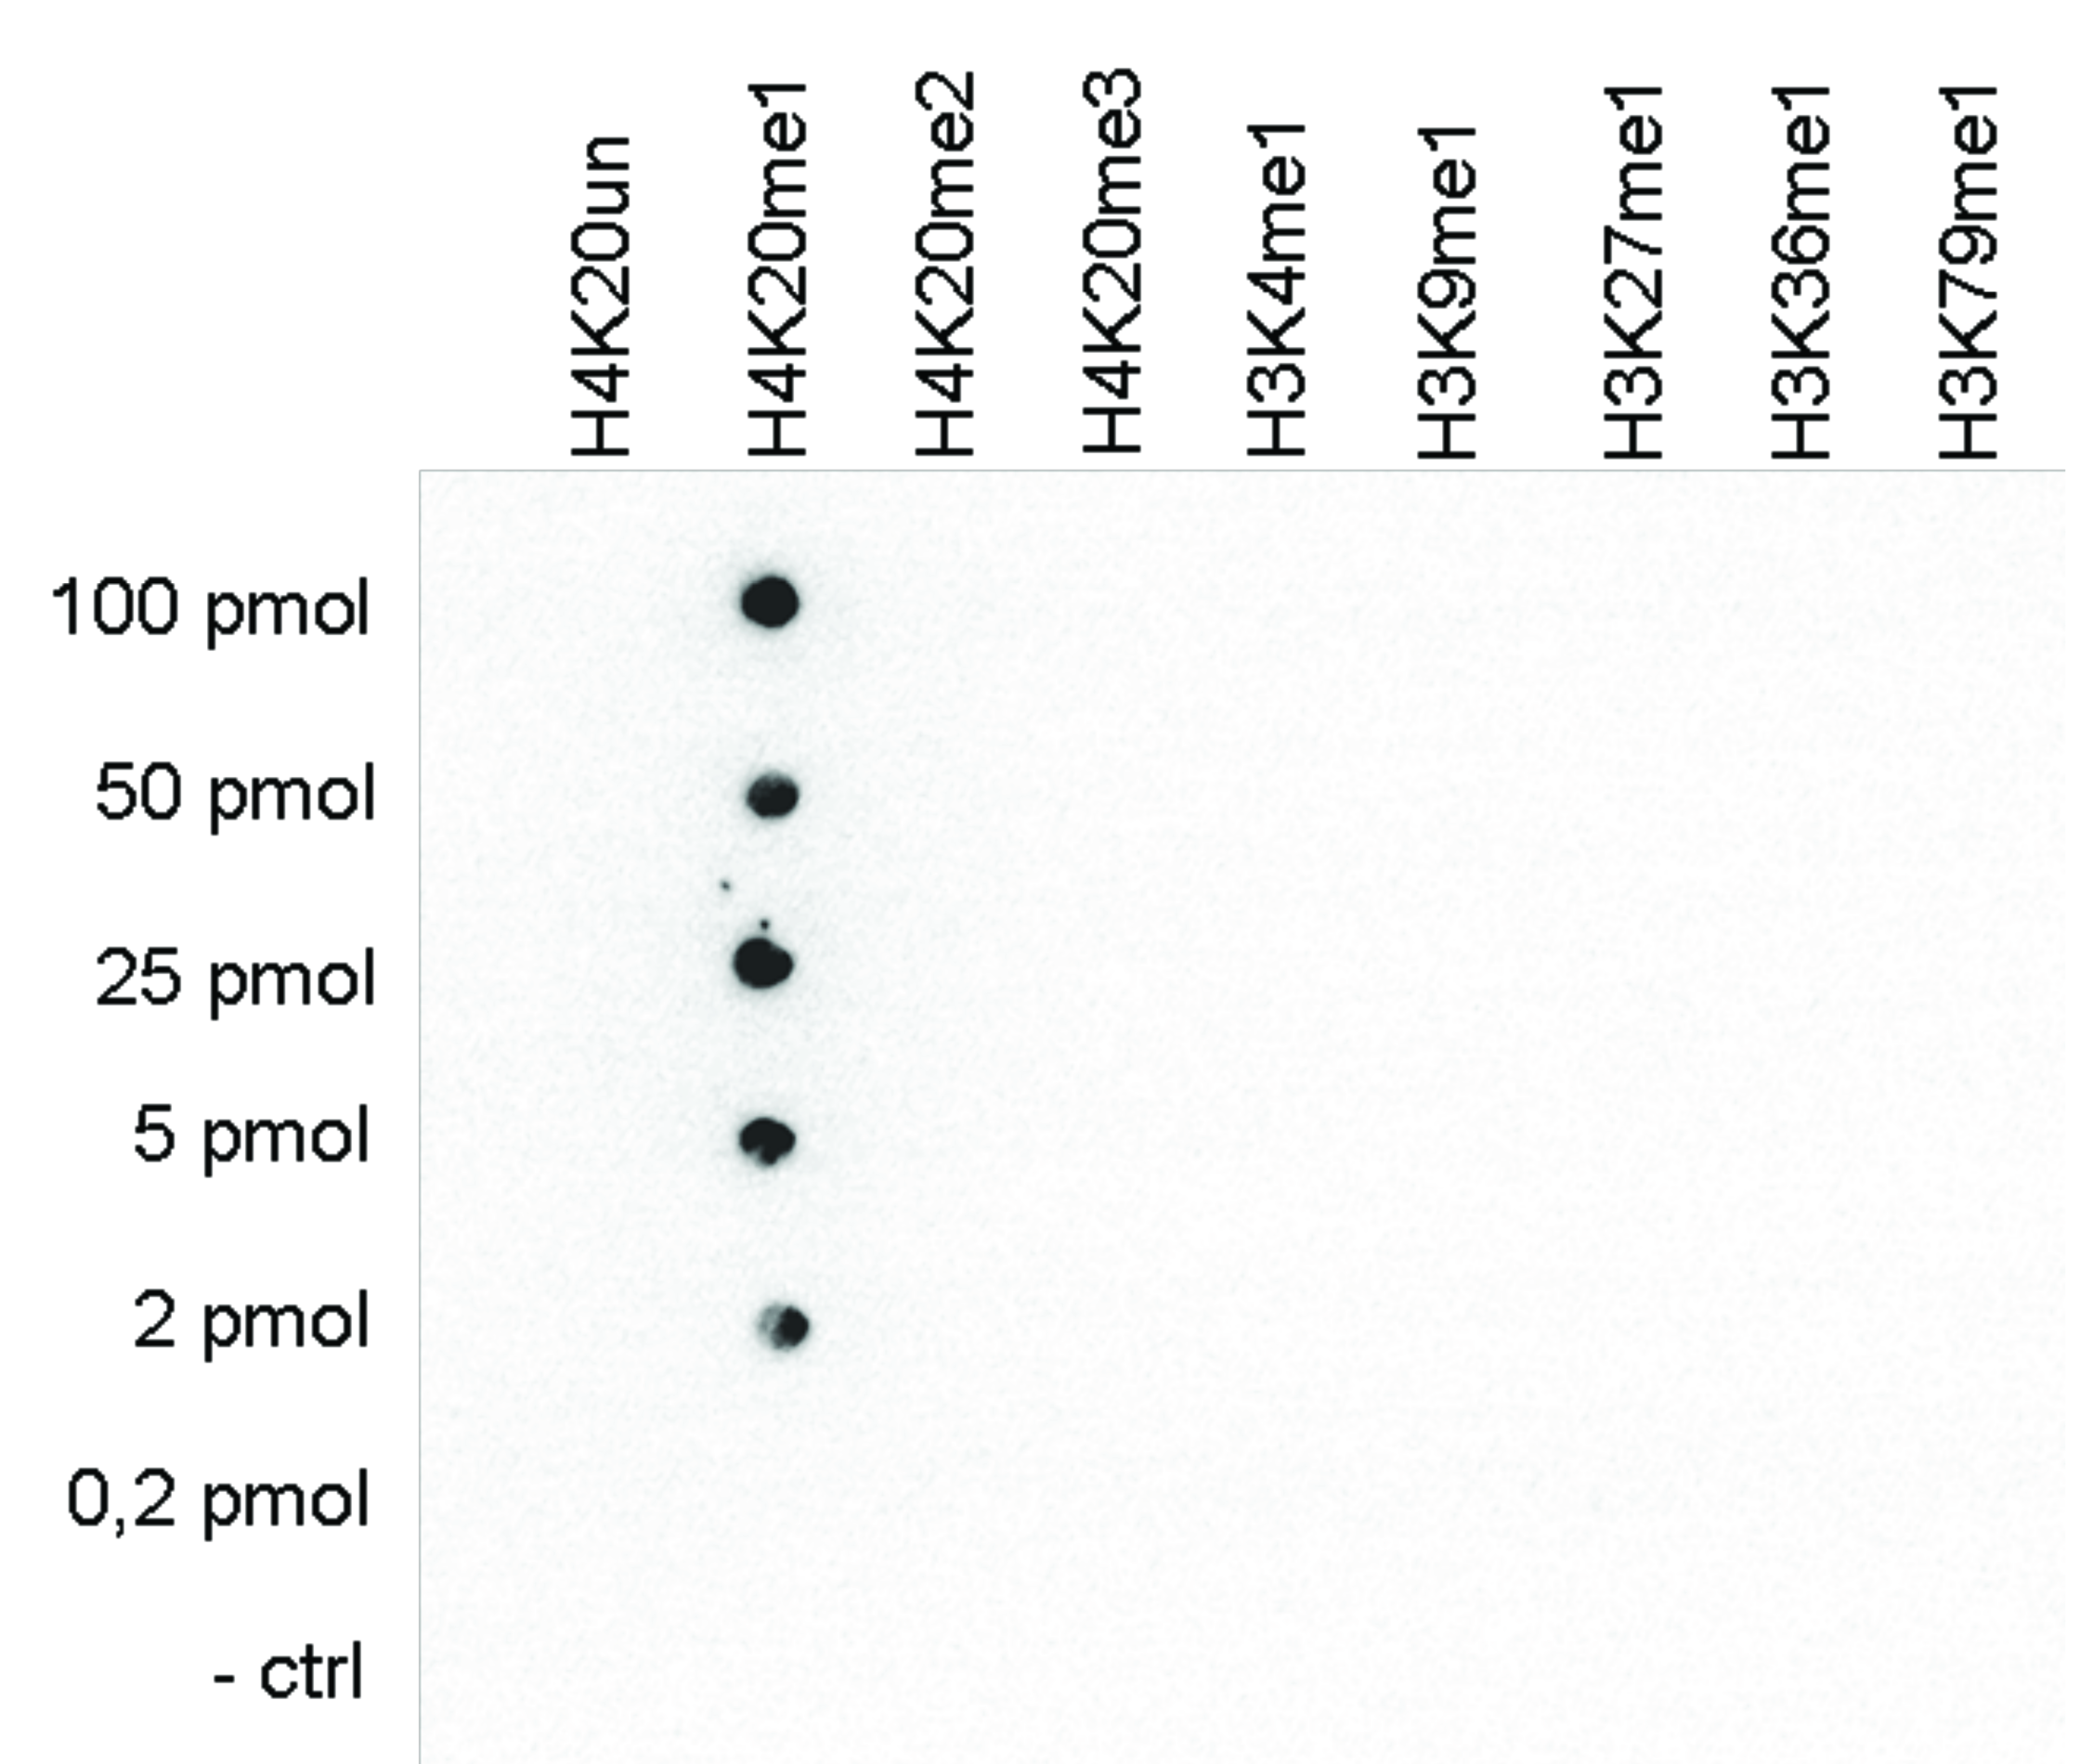 To check the specificity of the Bioss antibody against H4K20me1 (cat. No bs-53104R) a Dot Blot was performed with peptides containing different modifications of histone H3 and H4 or the unmodified H4K20 sequence. One hundred to 0.2 pmol of the peptide containing the respective histone modification were spotted on a membrane. The antibody was used at a dilution of 1:20,000. The figure shows a high specificity of the antibody for the modification of interest.